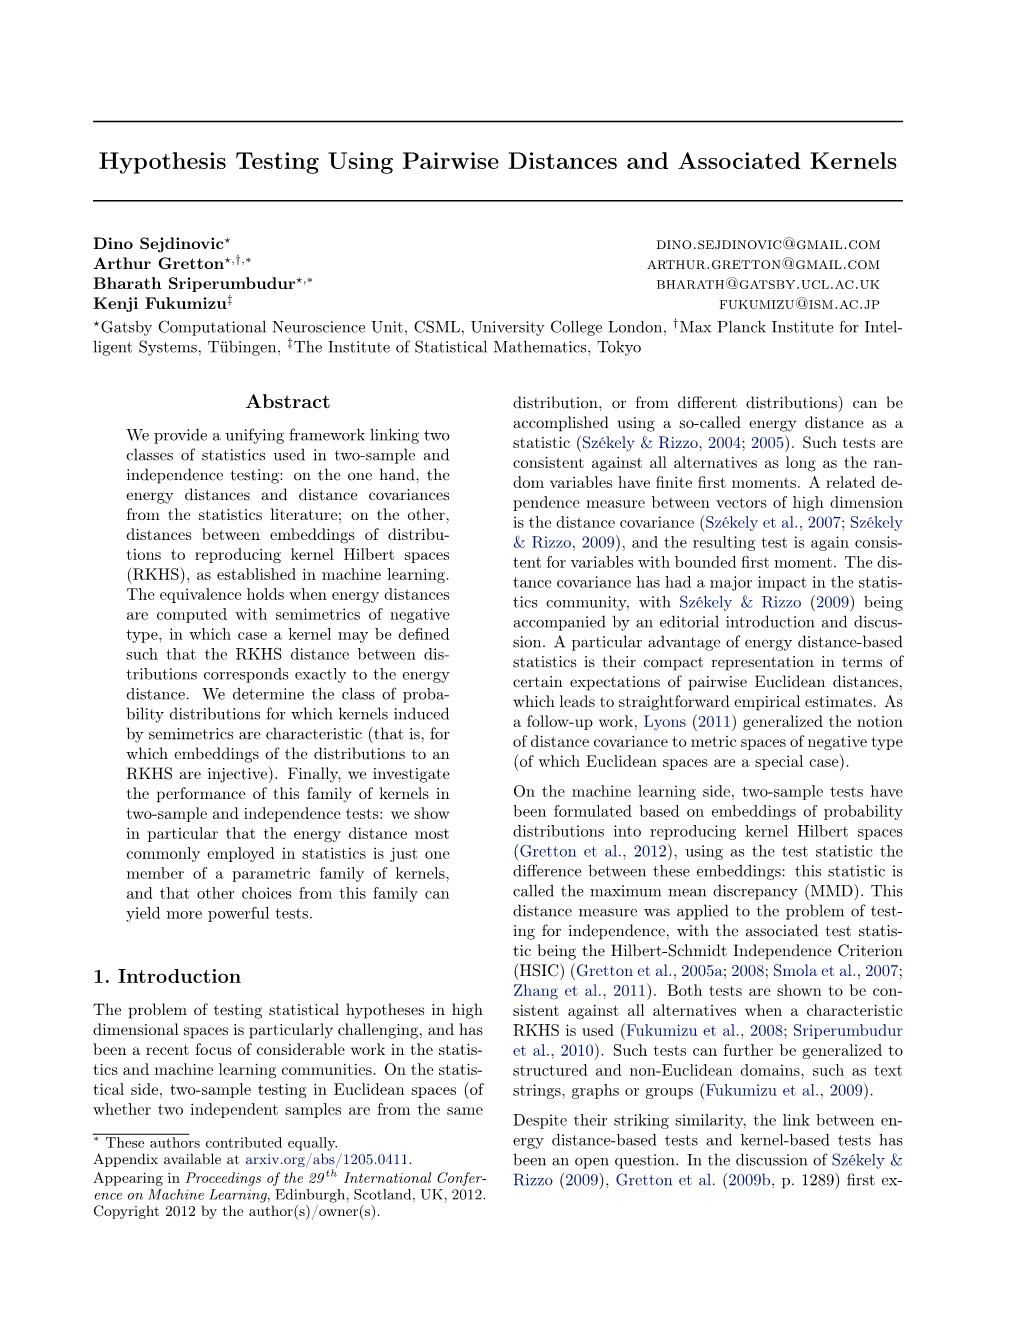 Hypothesis Testing Using Pairwise Distances and Associated Kernels